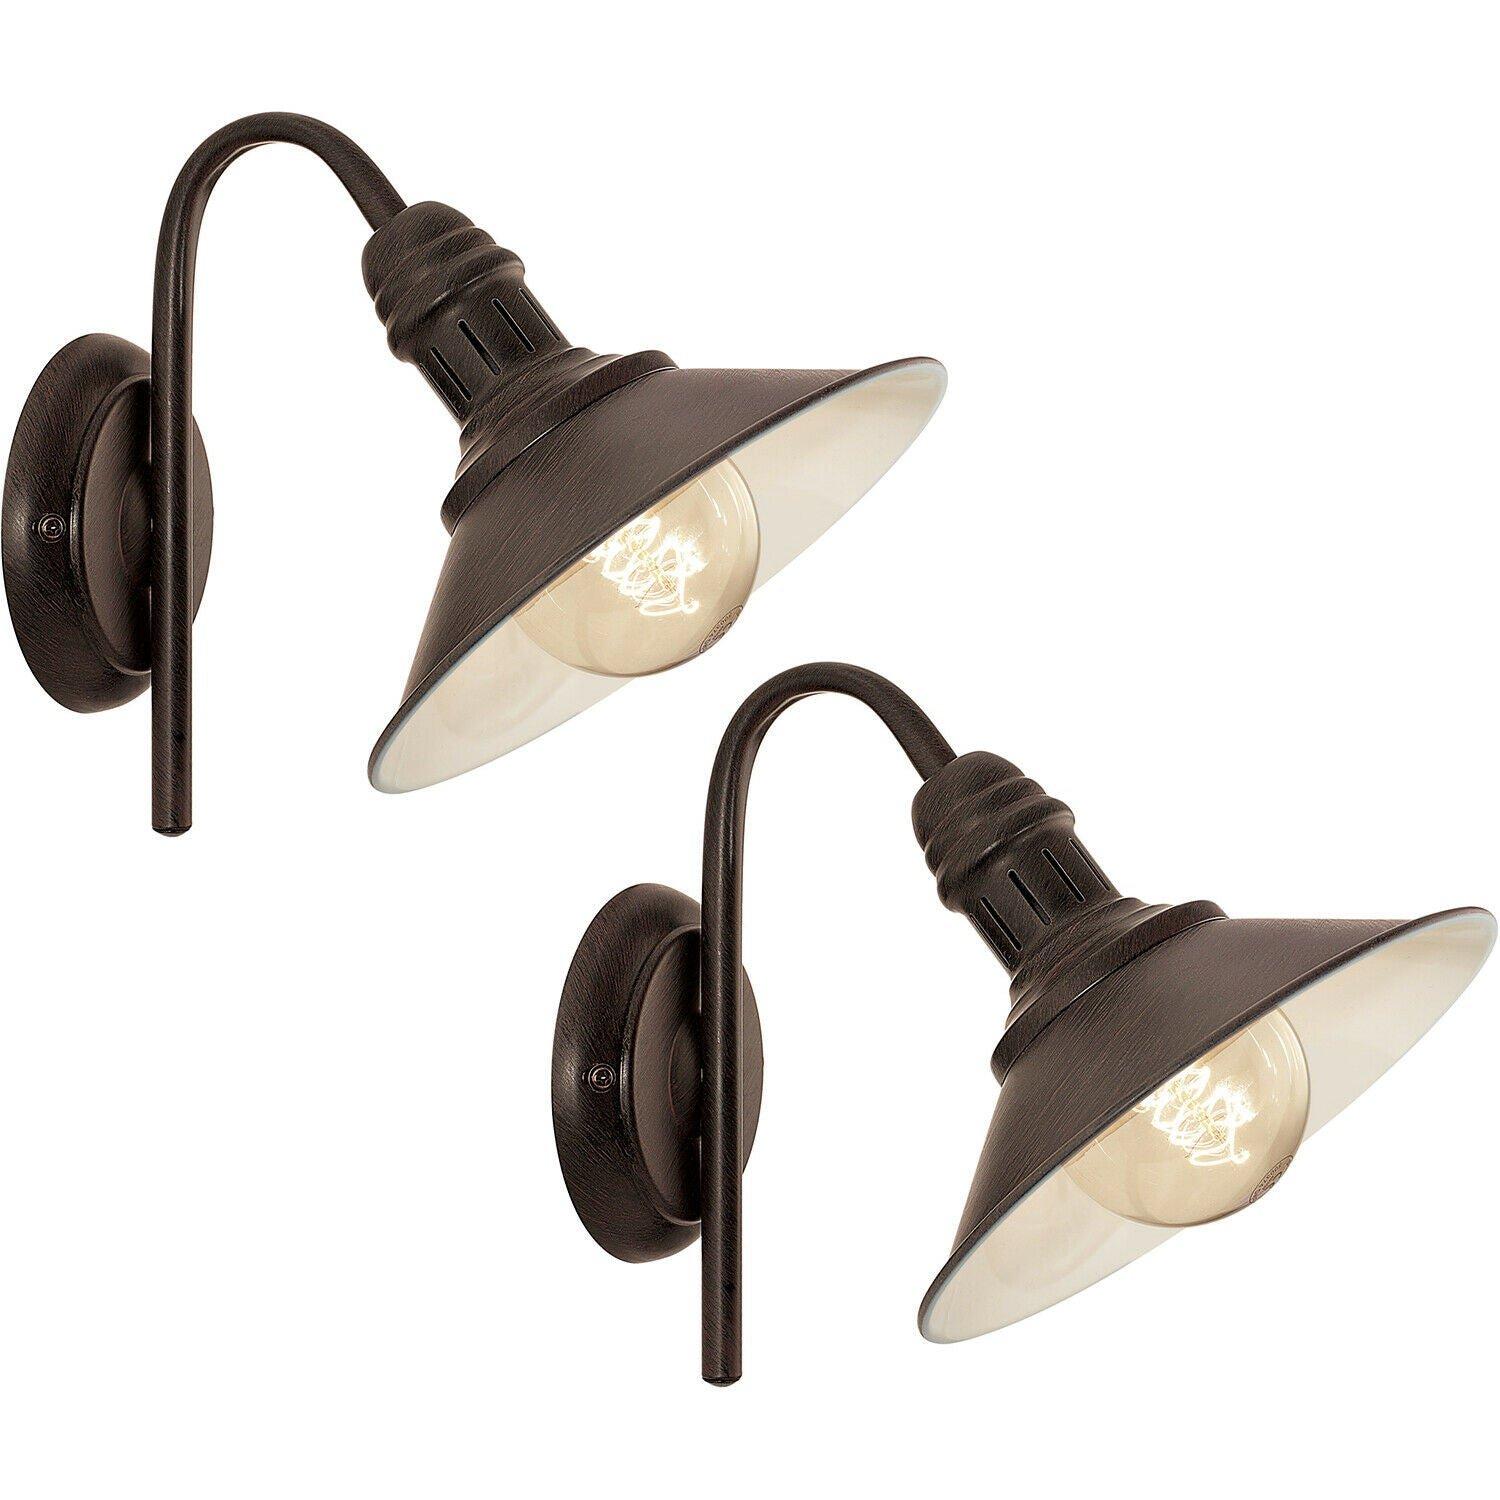 2 PACK LED Wall Light / Sconce Antique Brown & Beige Steel Shade 1x 60W E27